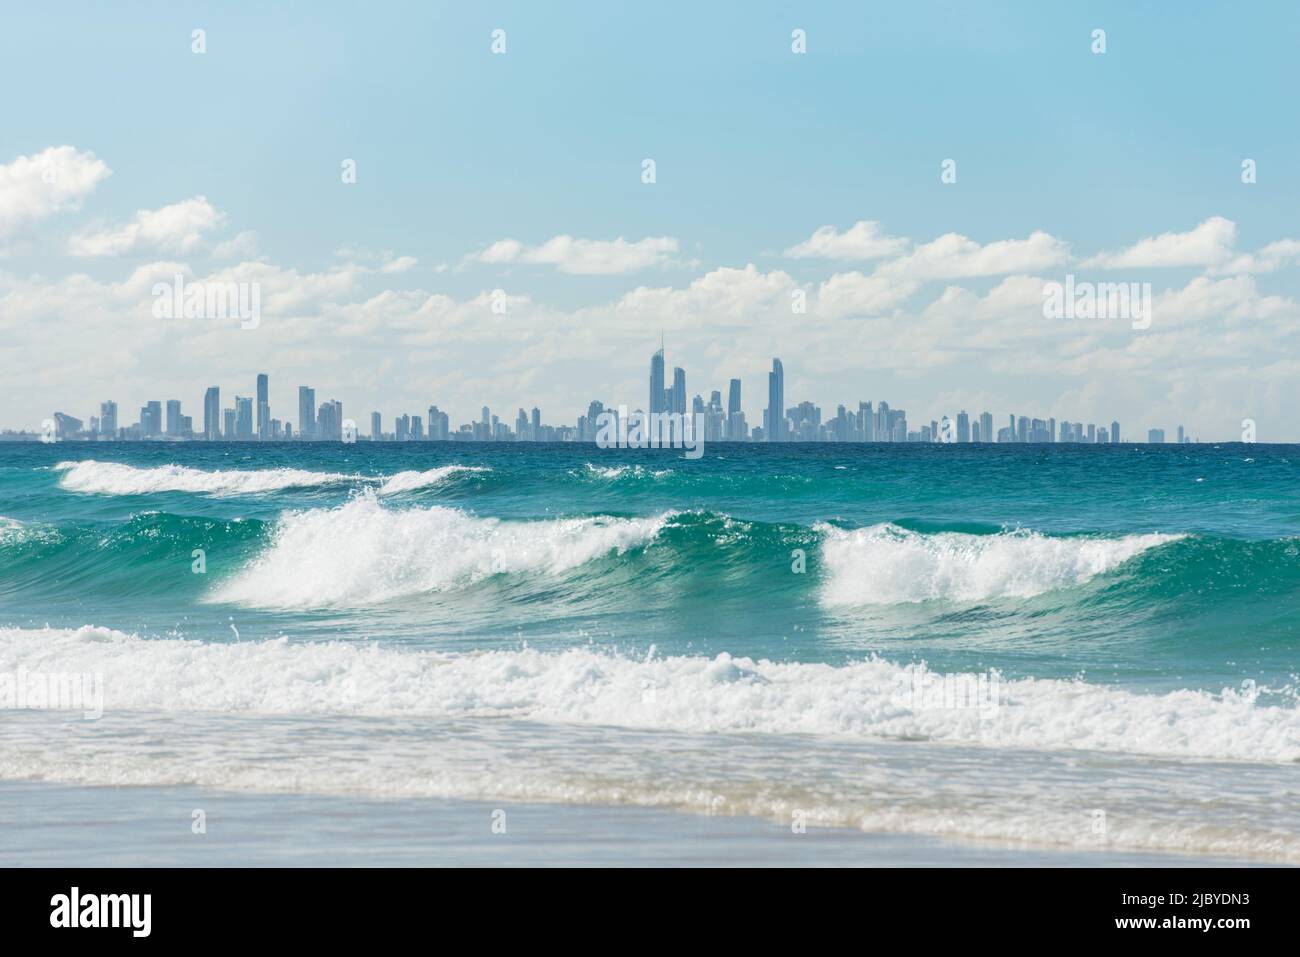 Looking across waves at Kirra Beach to city skyline of Surfers Paradise Stock Photo